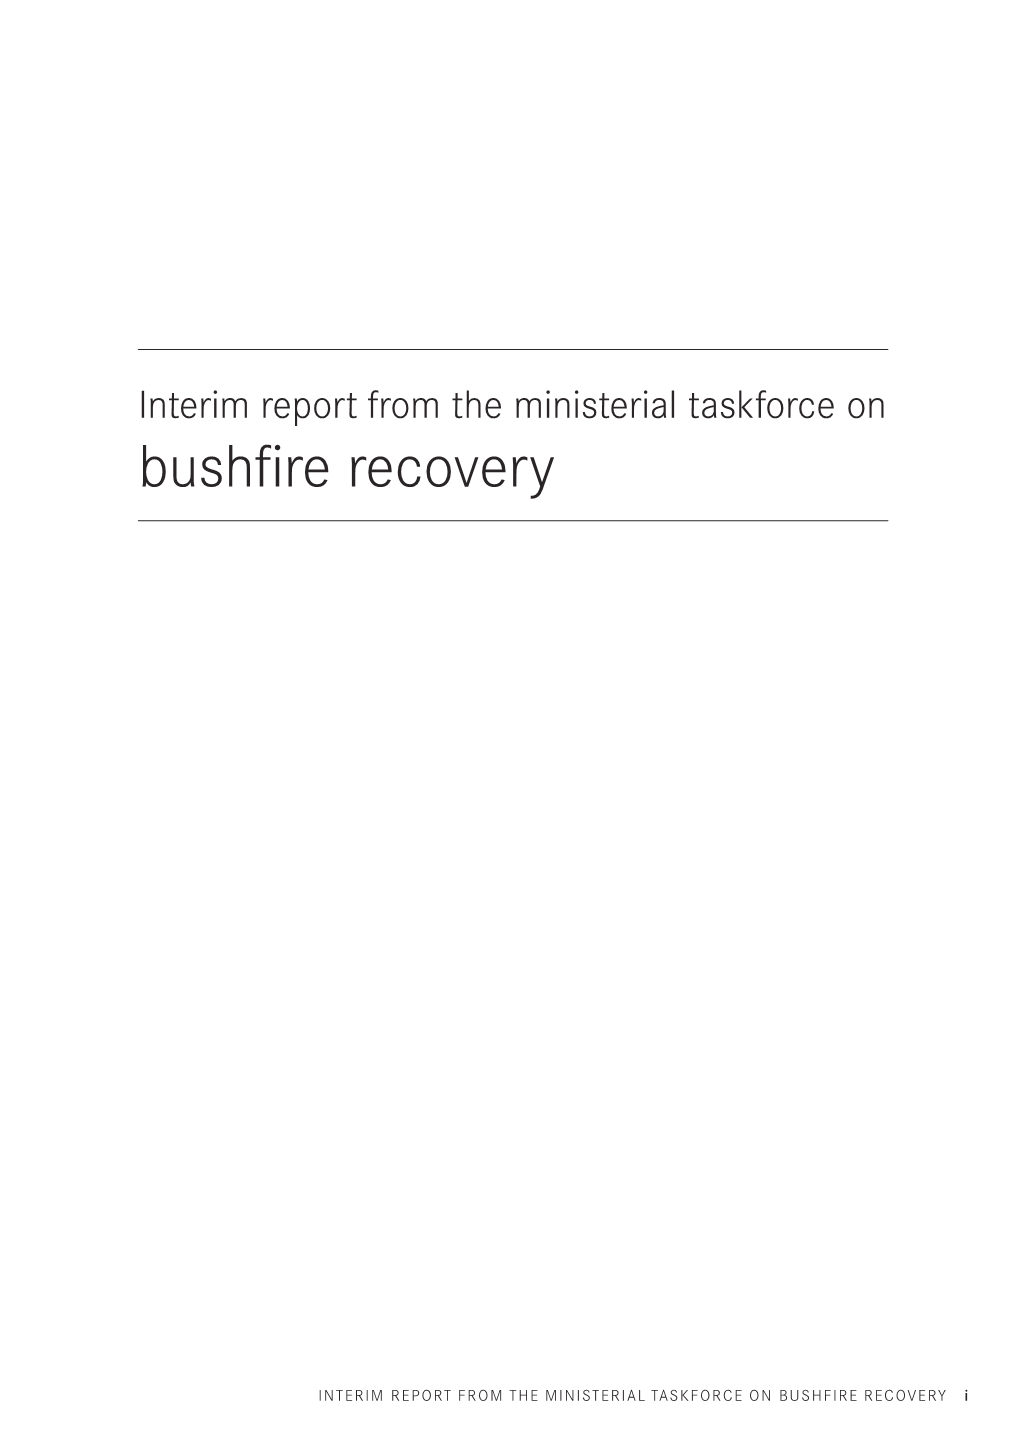 Interim Report from the Ministerial Taskforce on Bushfire Recovery